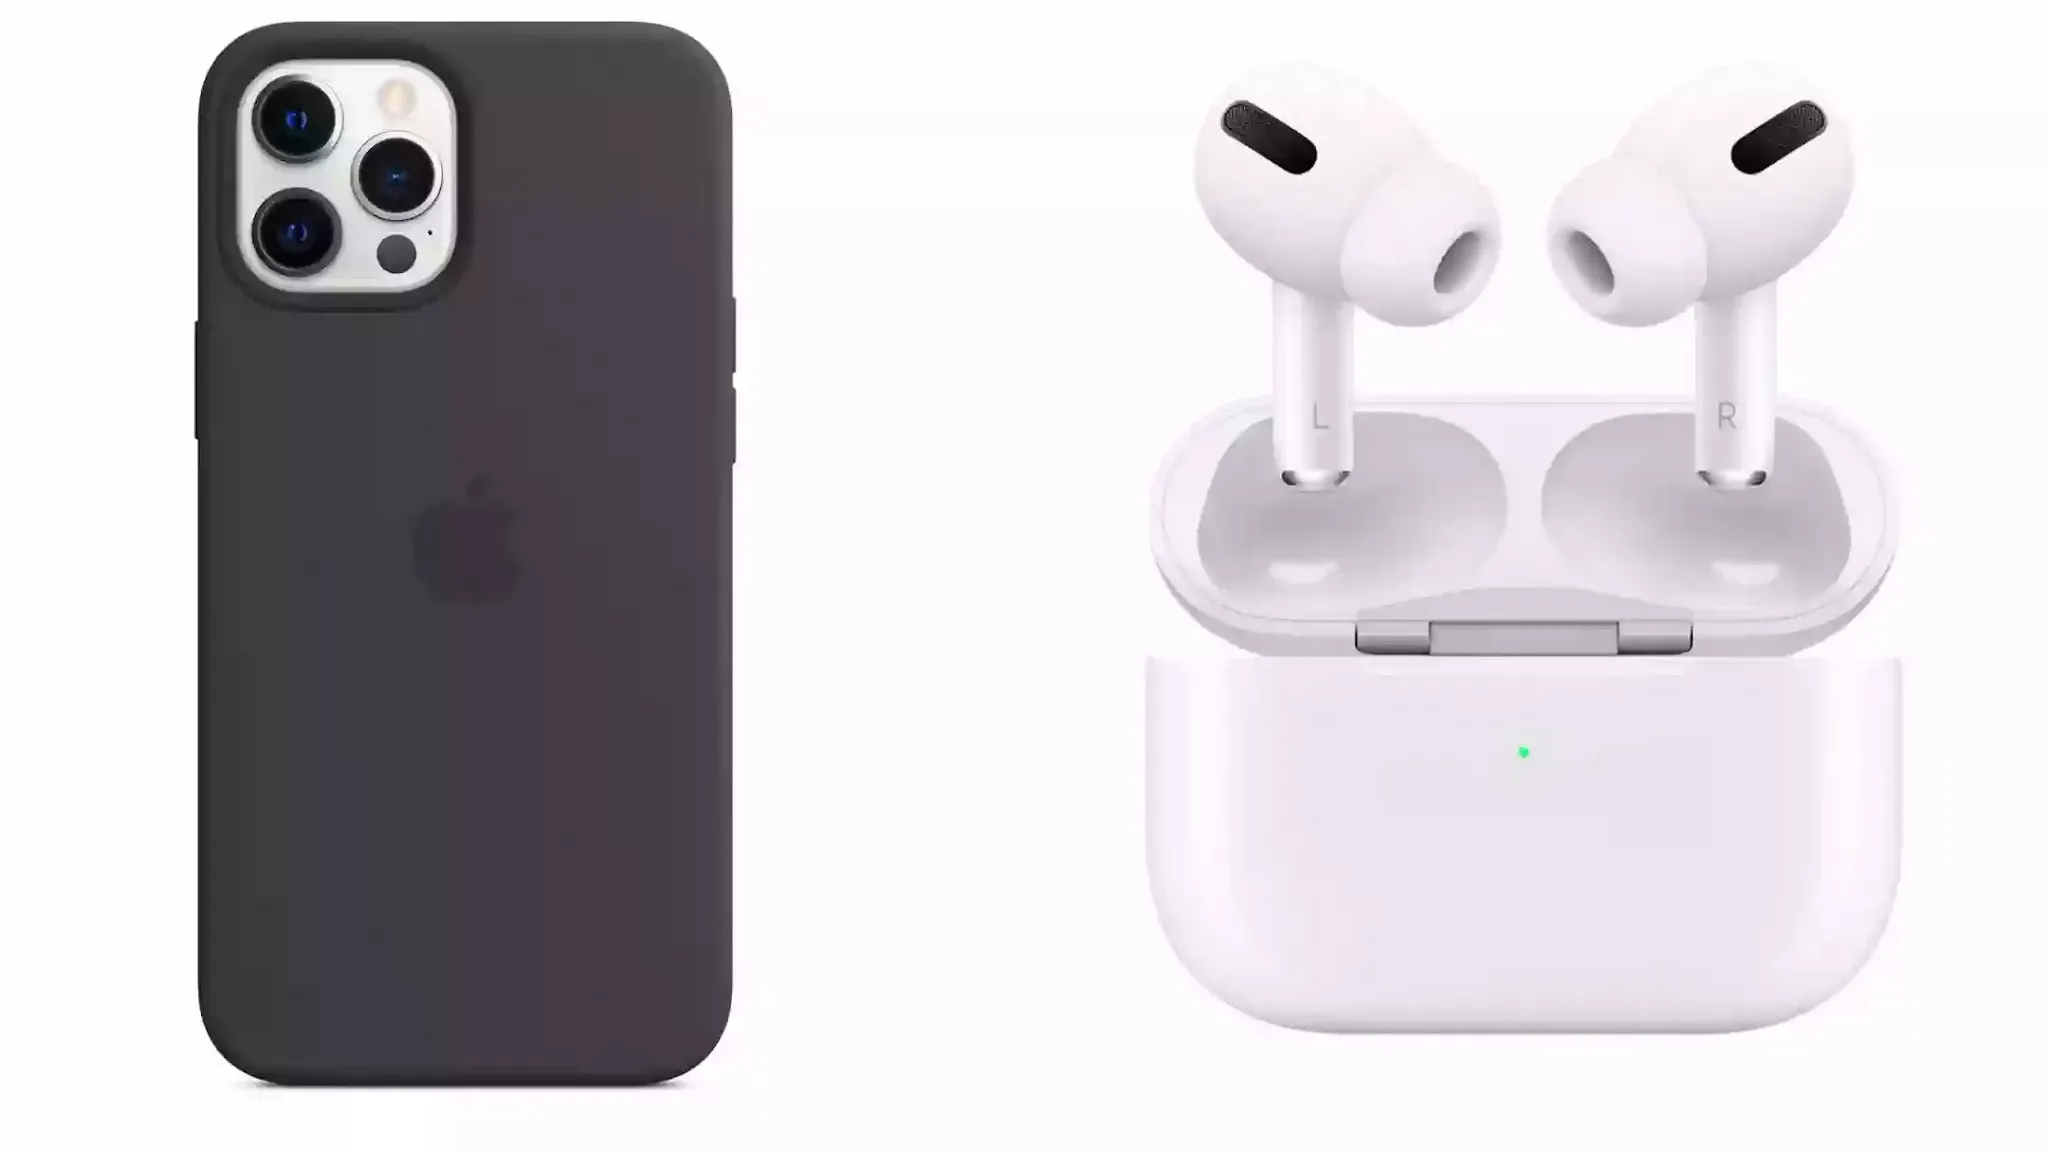 12 Pro Max Combo Deals With AirPods Pro